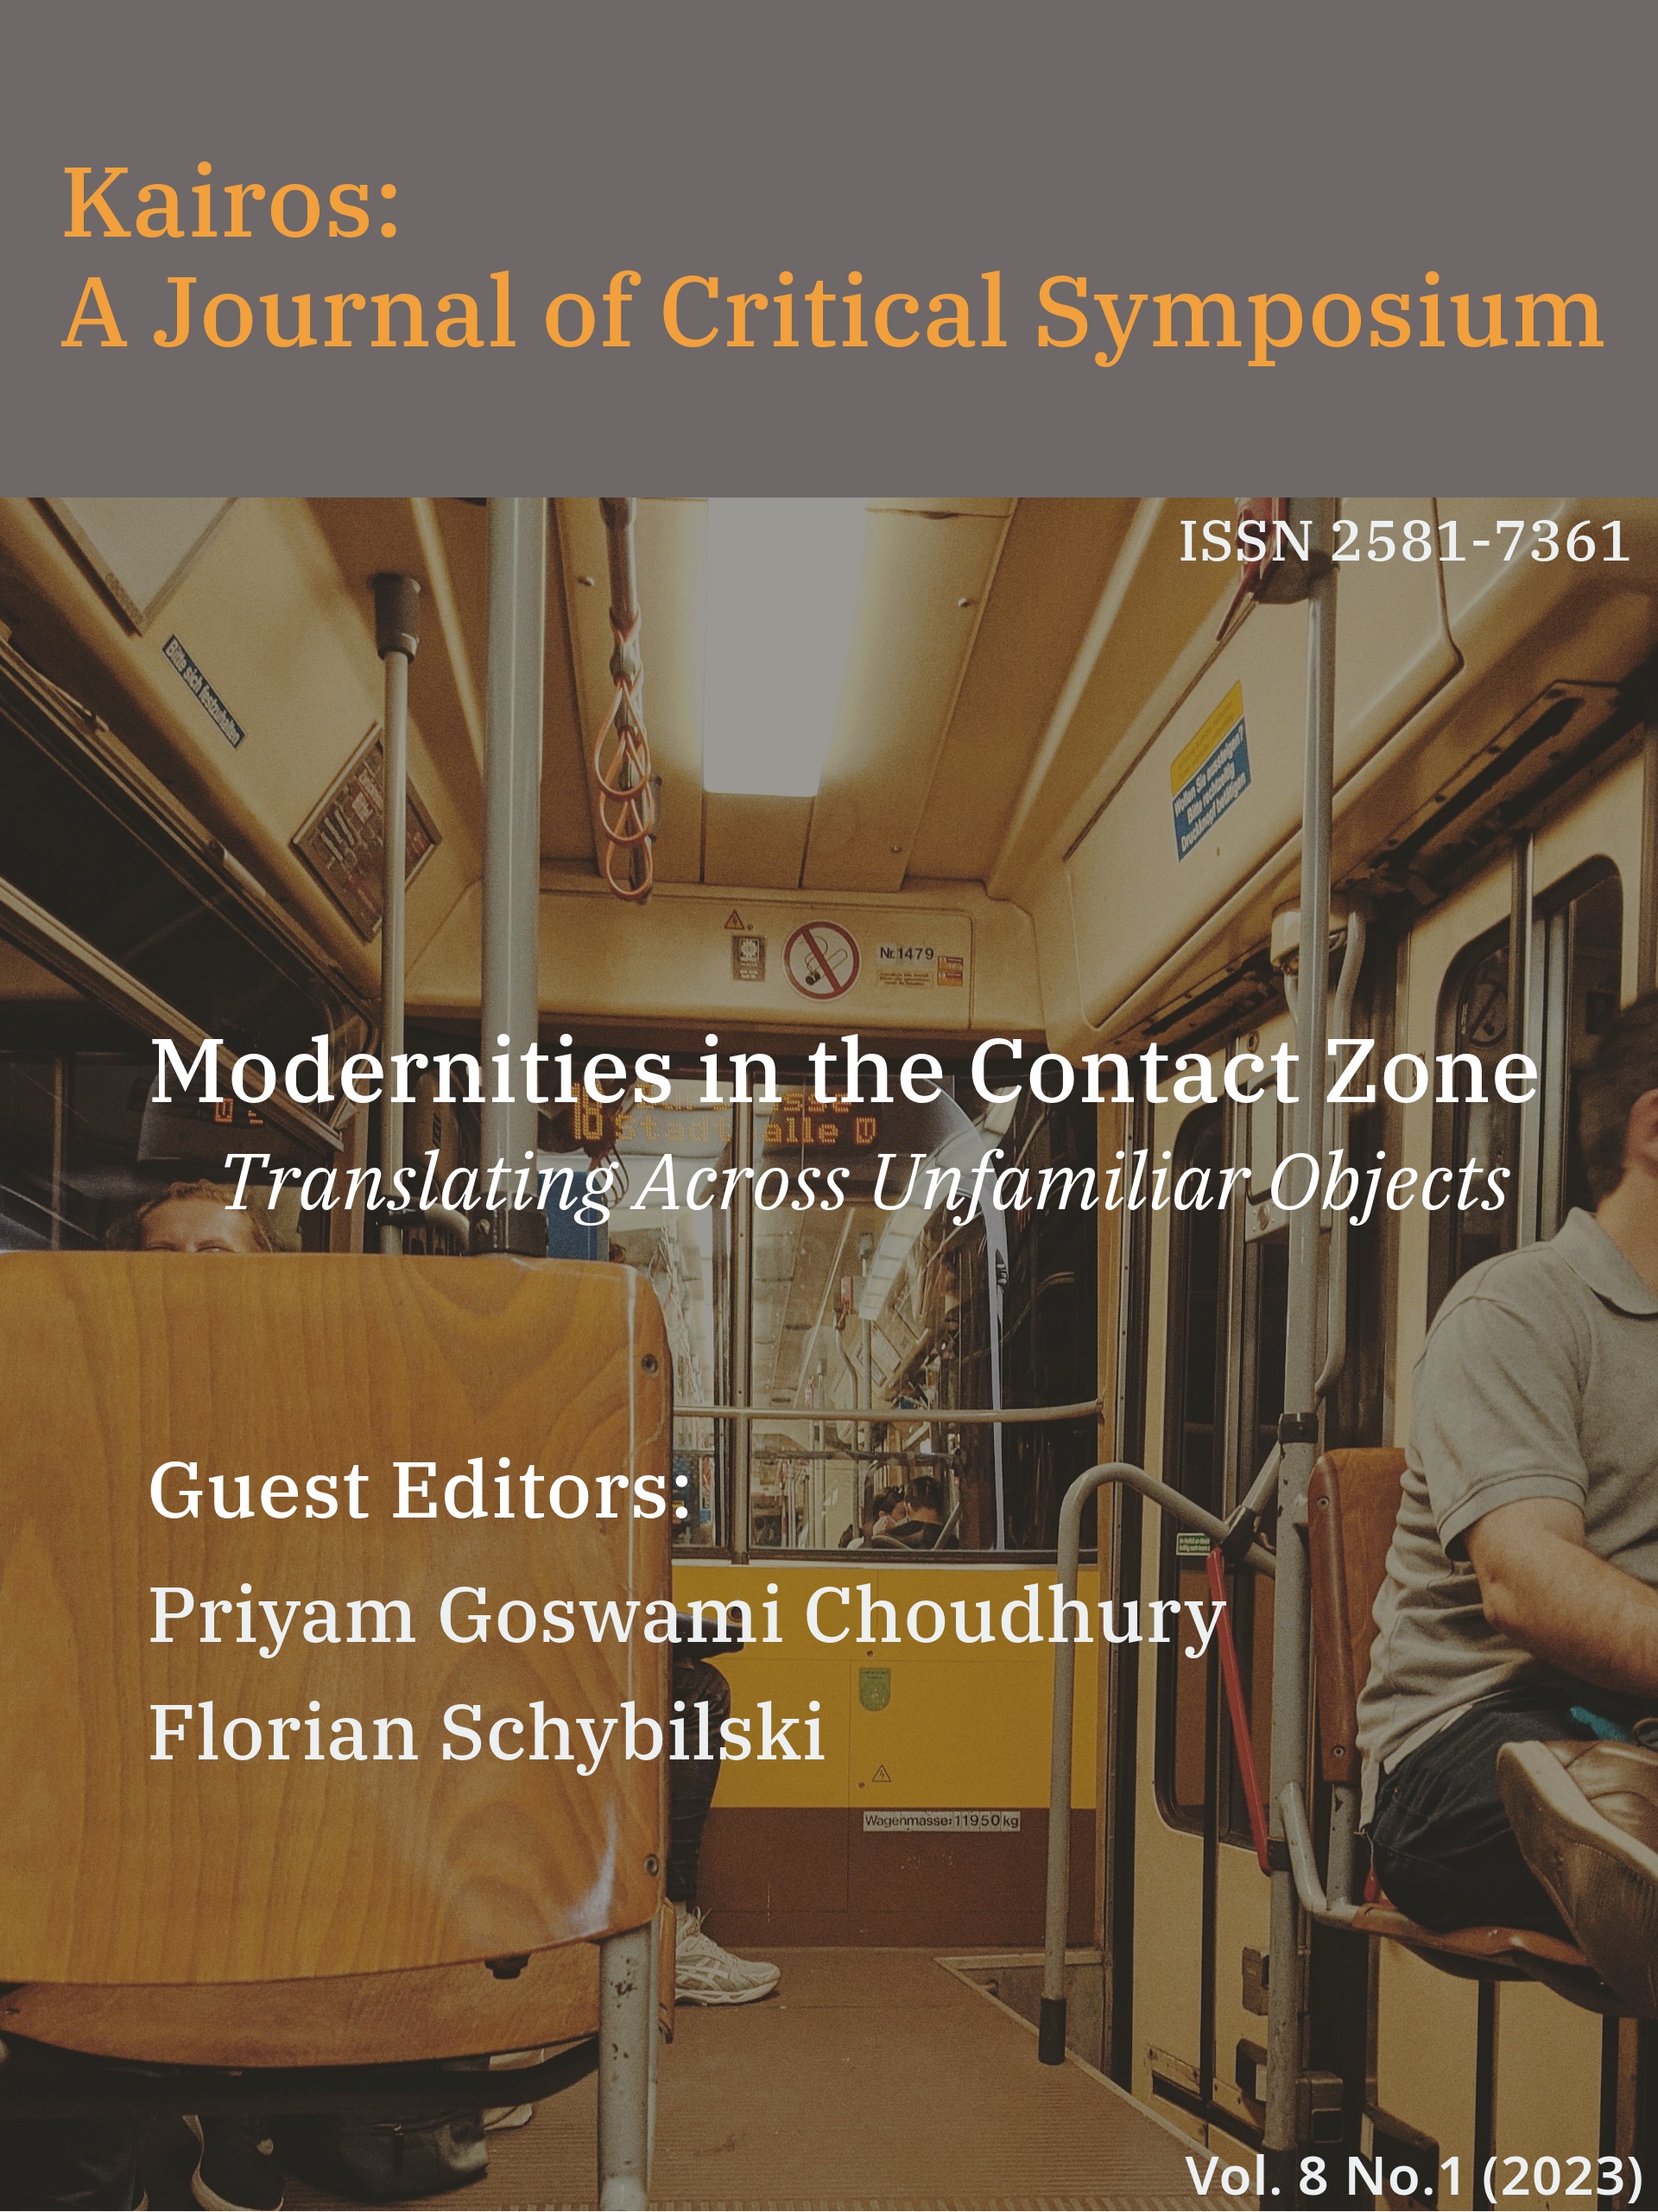 					View Vol. 8 No. 1 (2023): Special Issue: Modernities in the Contact Zone. Translating Across Unfamiliar Objects
				